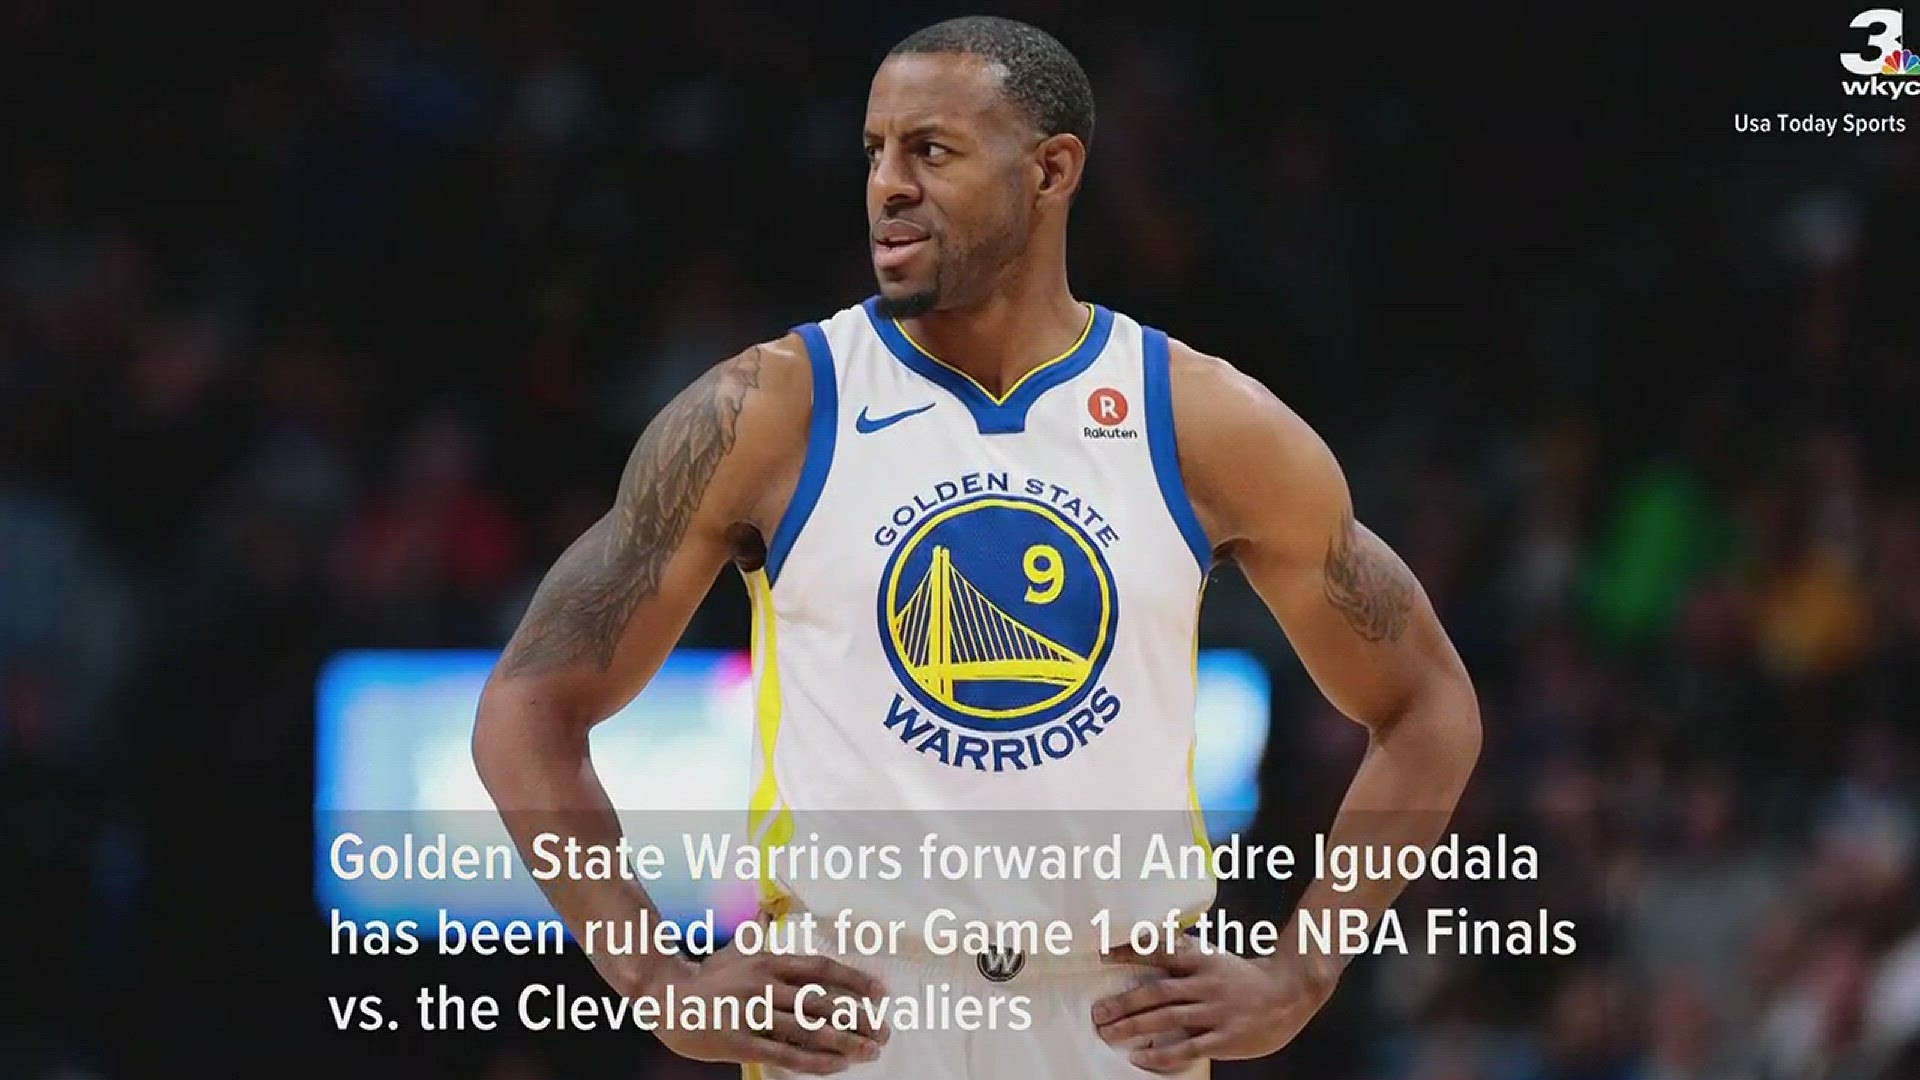 Golden State Warriors F Andre Iguodala ruled out for Game 1 of NBA Finals vs. Cleveland Cavaliers